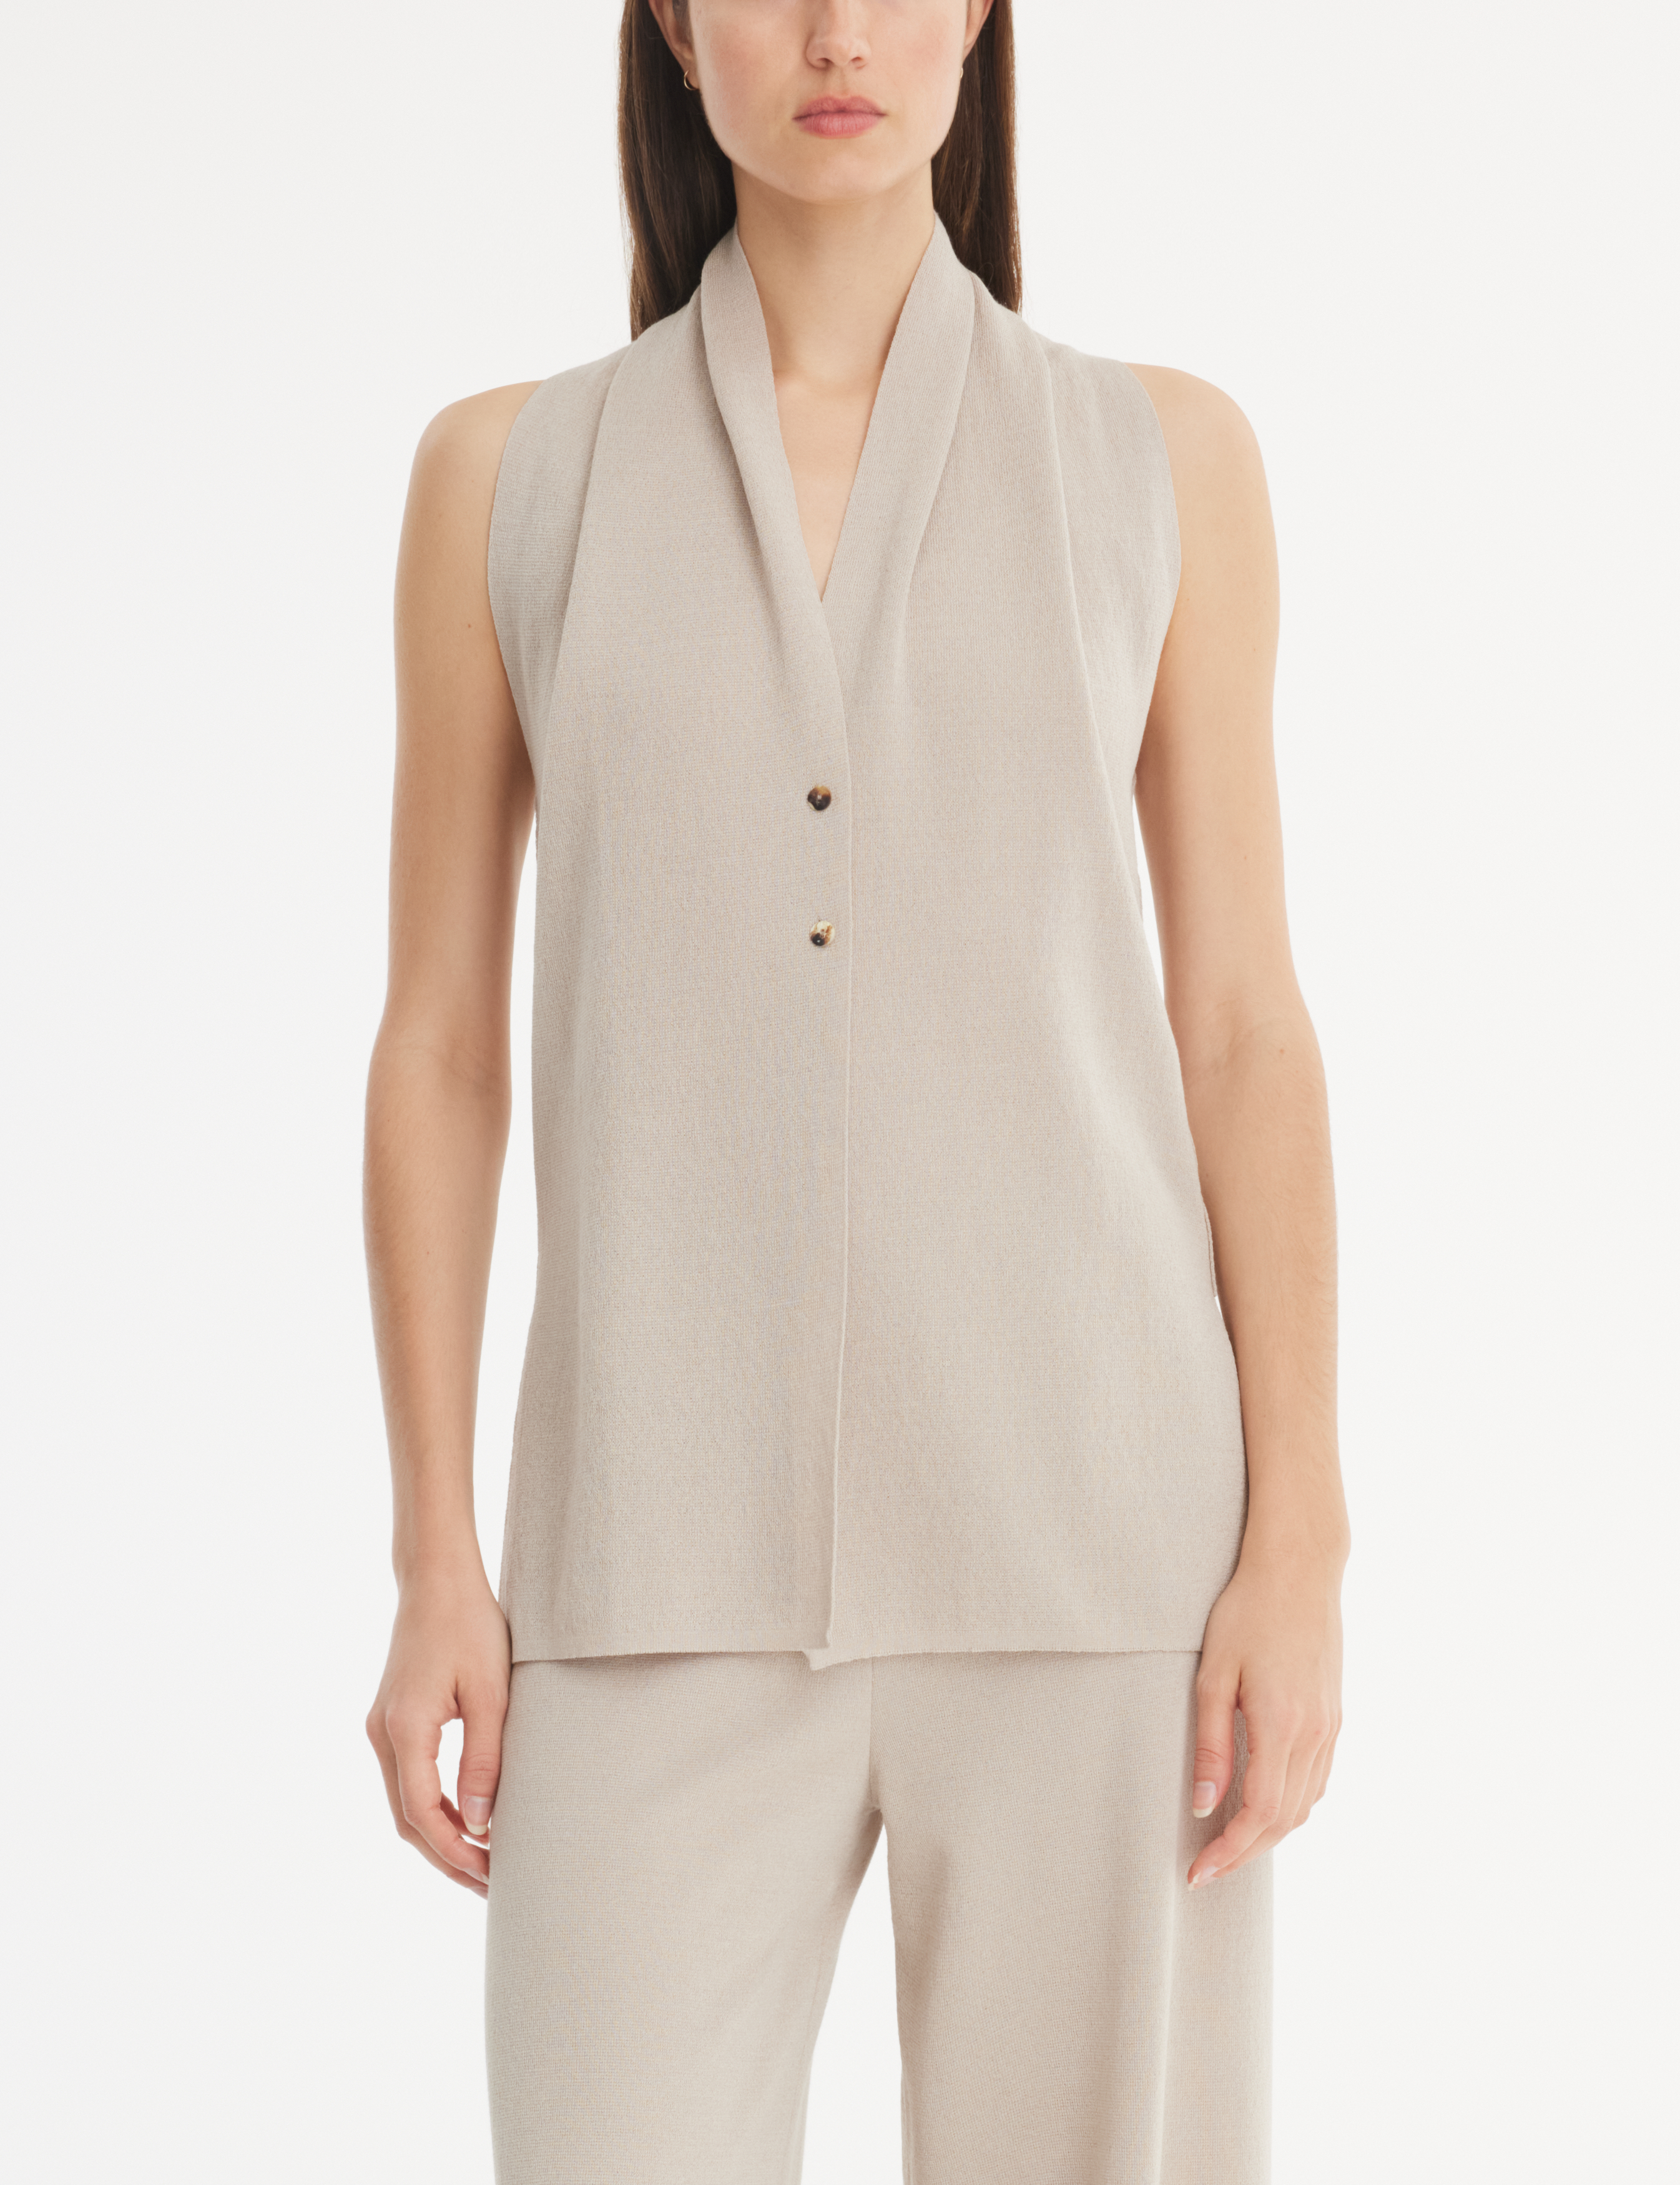 Mastic cropped sweater - asymmetric by Sarah Pacini